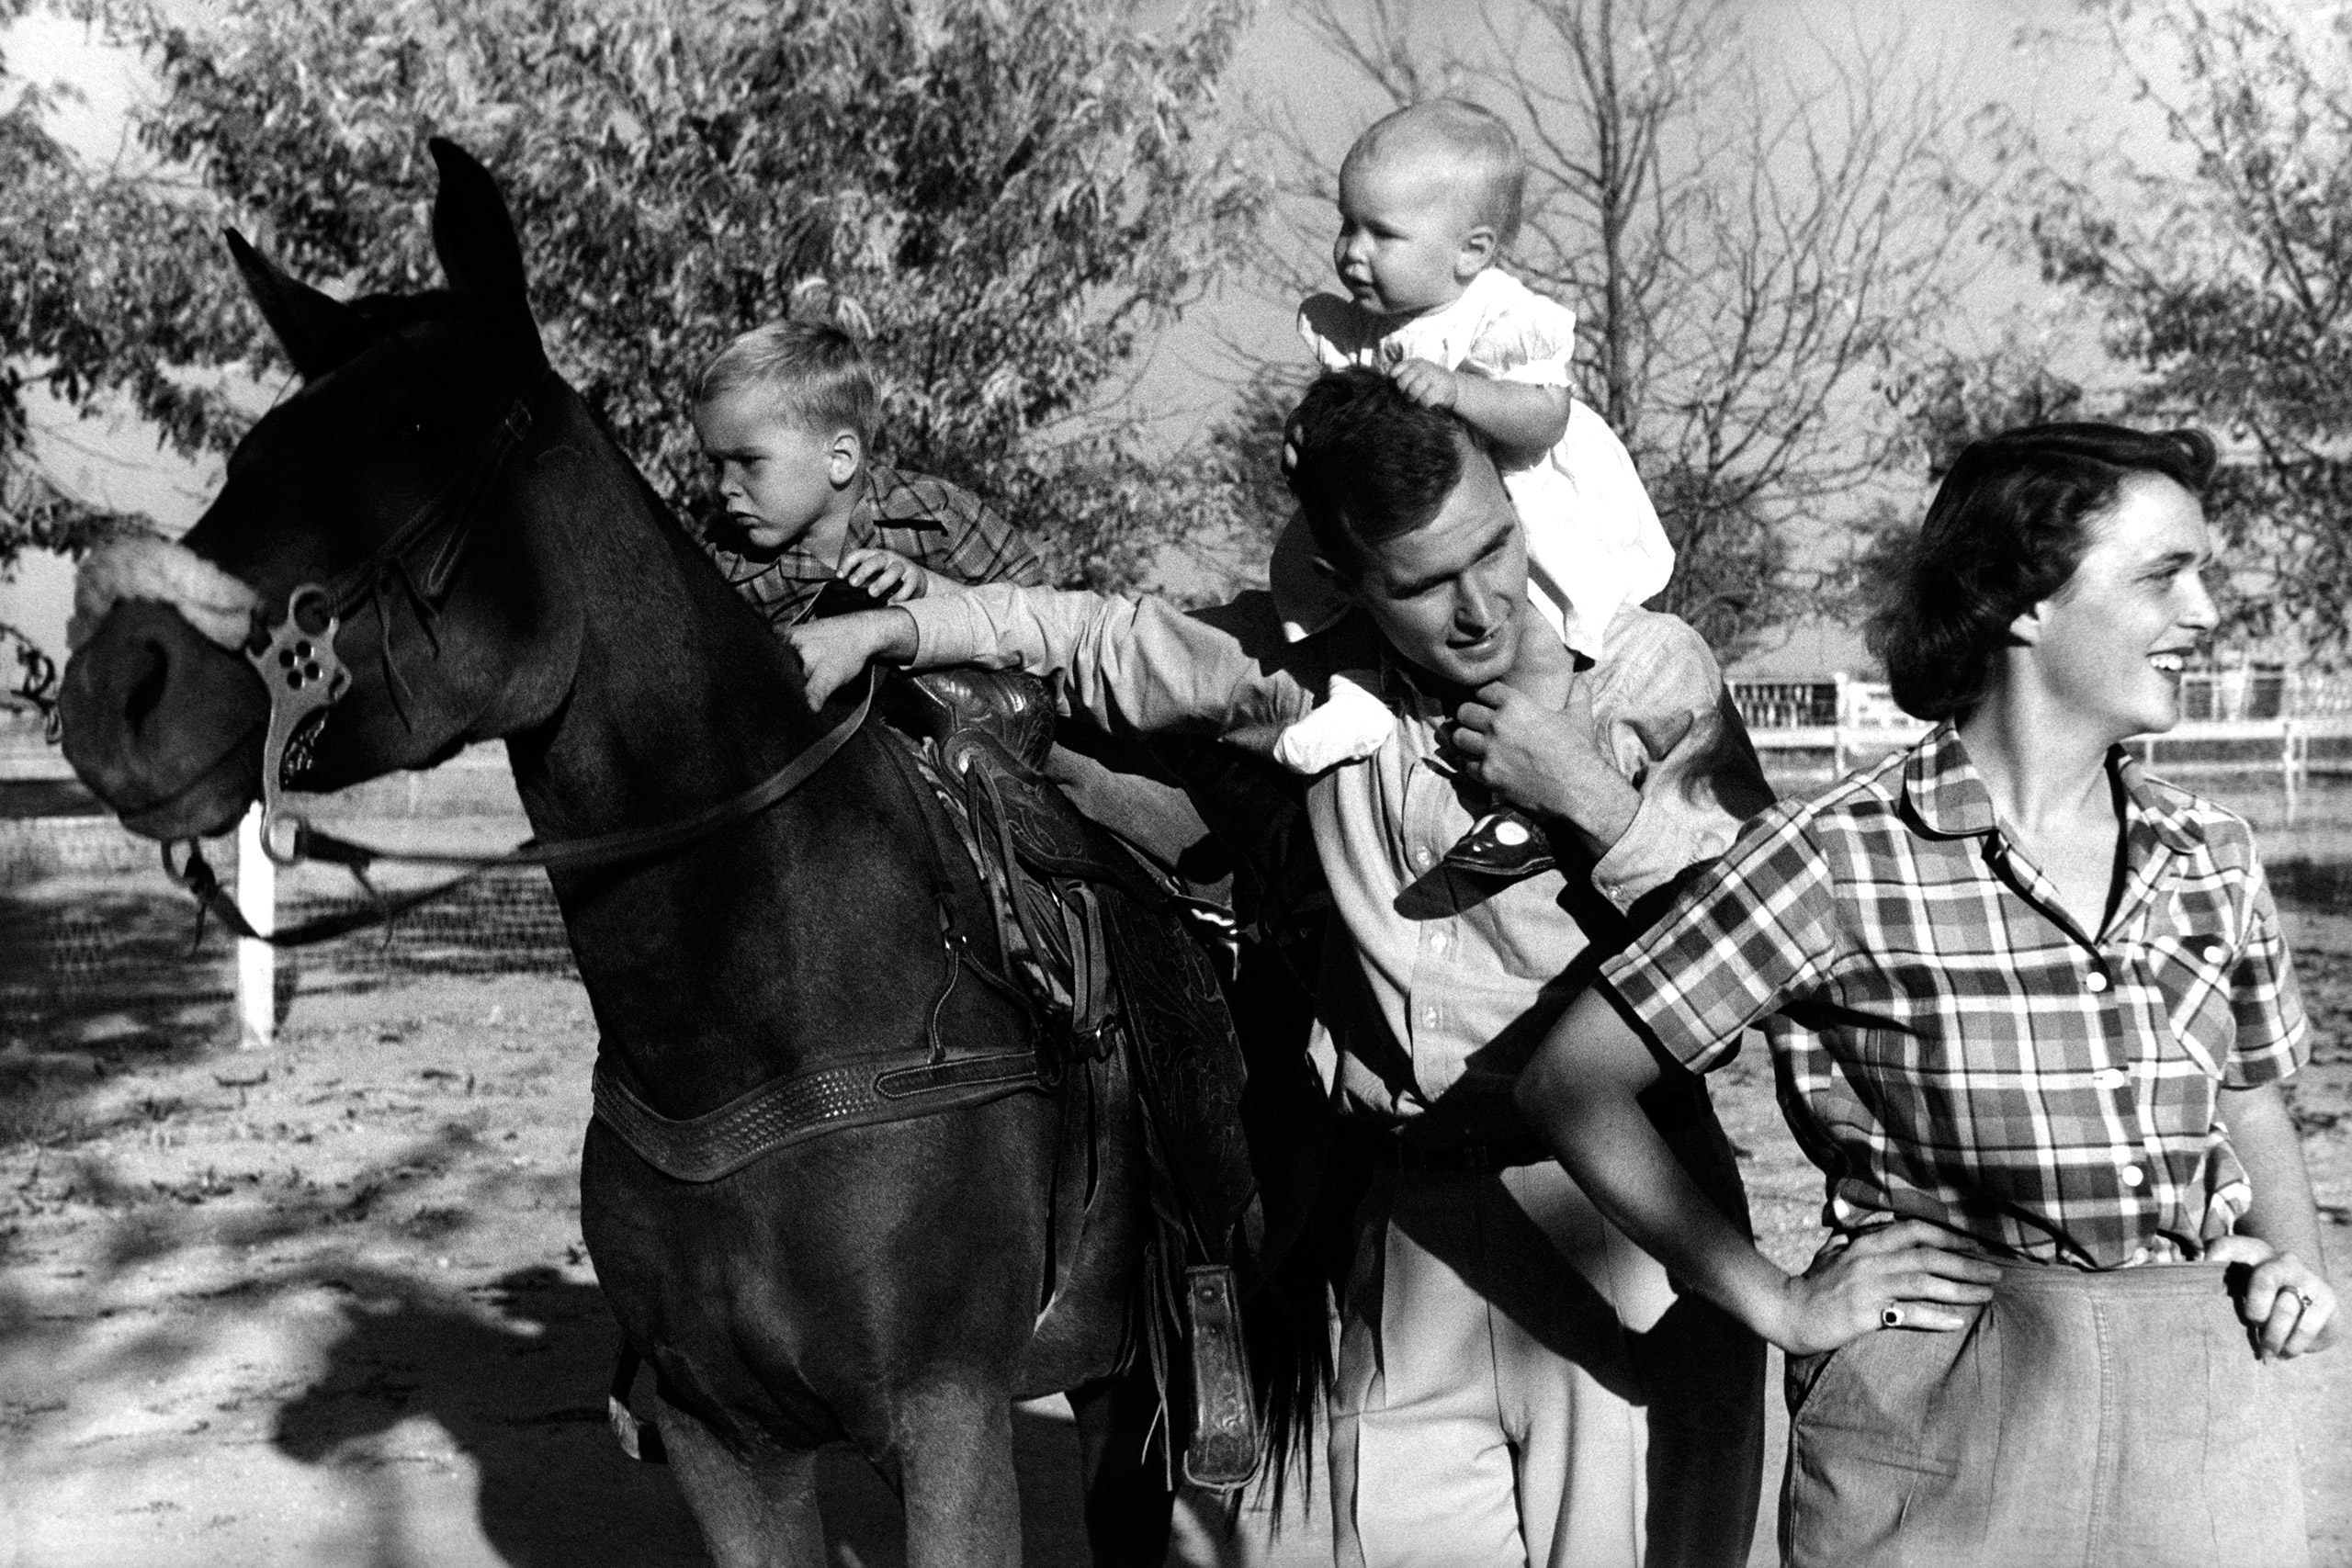 George H. W. Bush with his wife, Barbara with their children Pauline and George W. on horse in the yard of their Midland, Texas ranch, 1950.